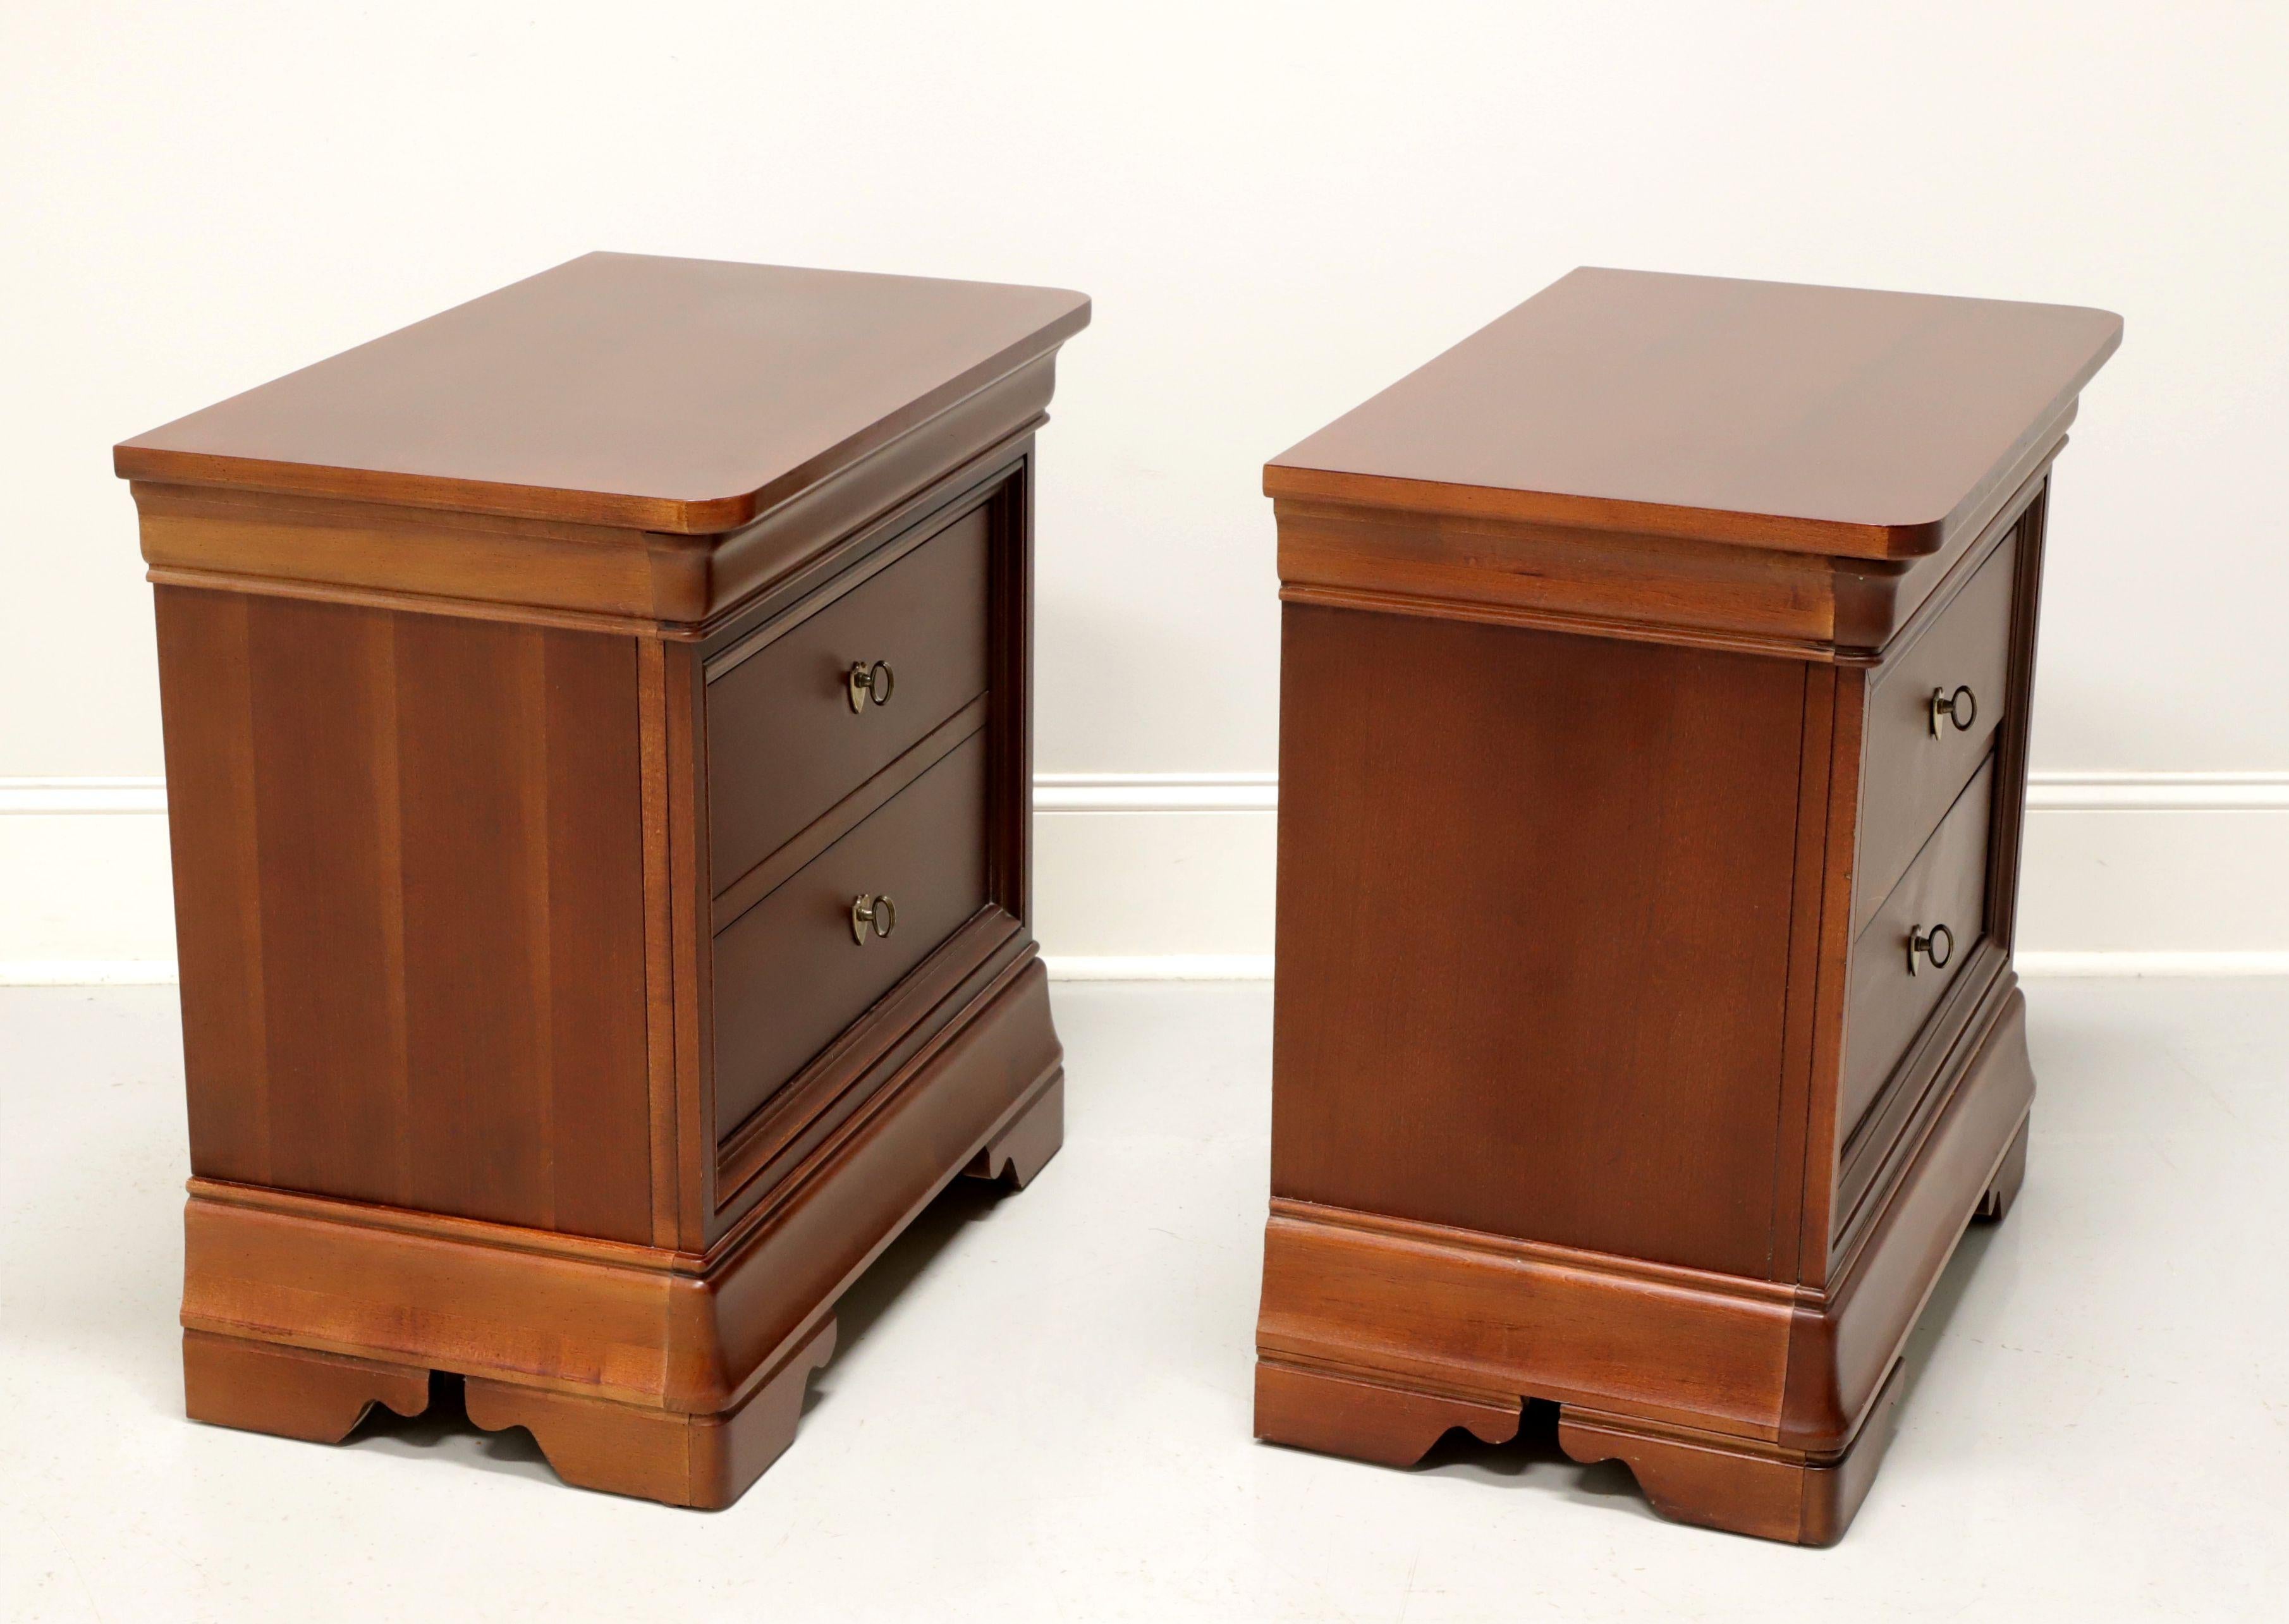 A pair of French Louis Philippe style nightstands by Thomasville, from their Impressions Martinique Collection. Cherry wood with their Merlot finish, brass hardware, rounded corners to top and bracket feet. Features two drawers of dovetail